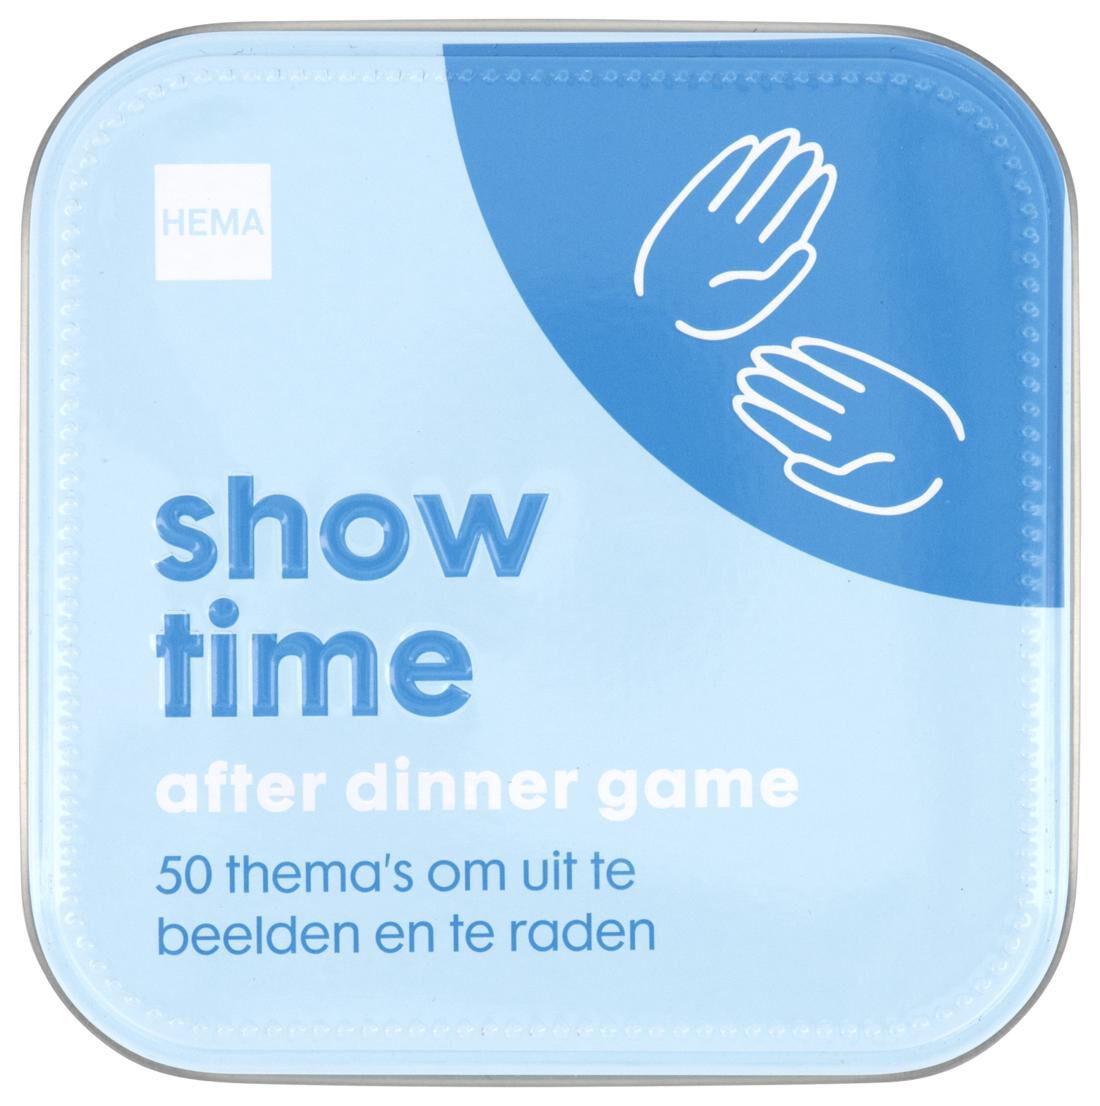 HEMA After Dinner Game - Showtime